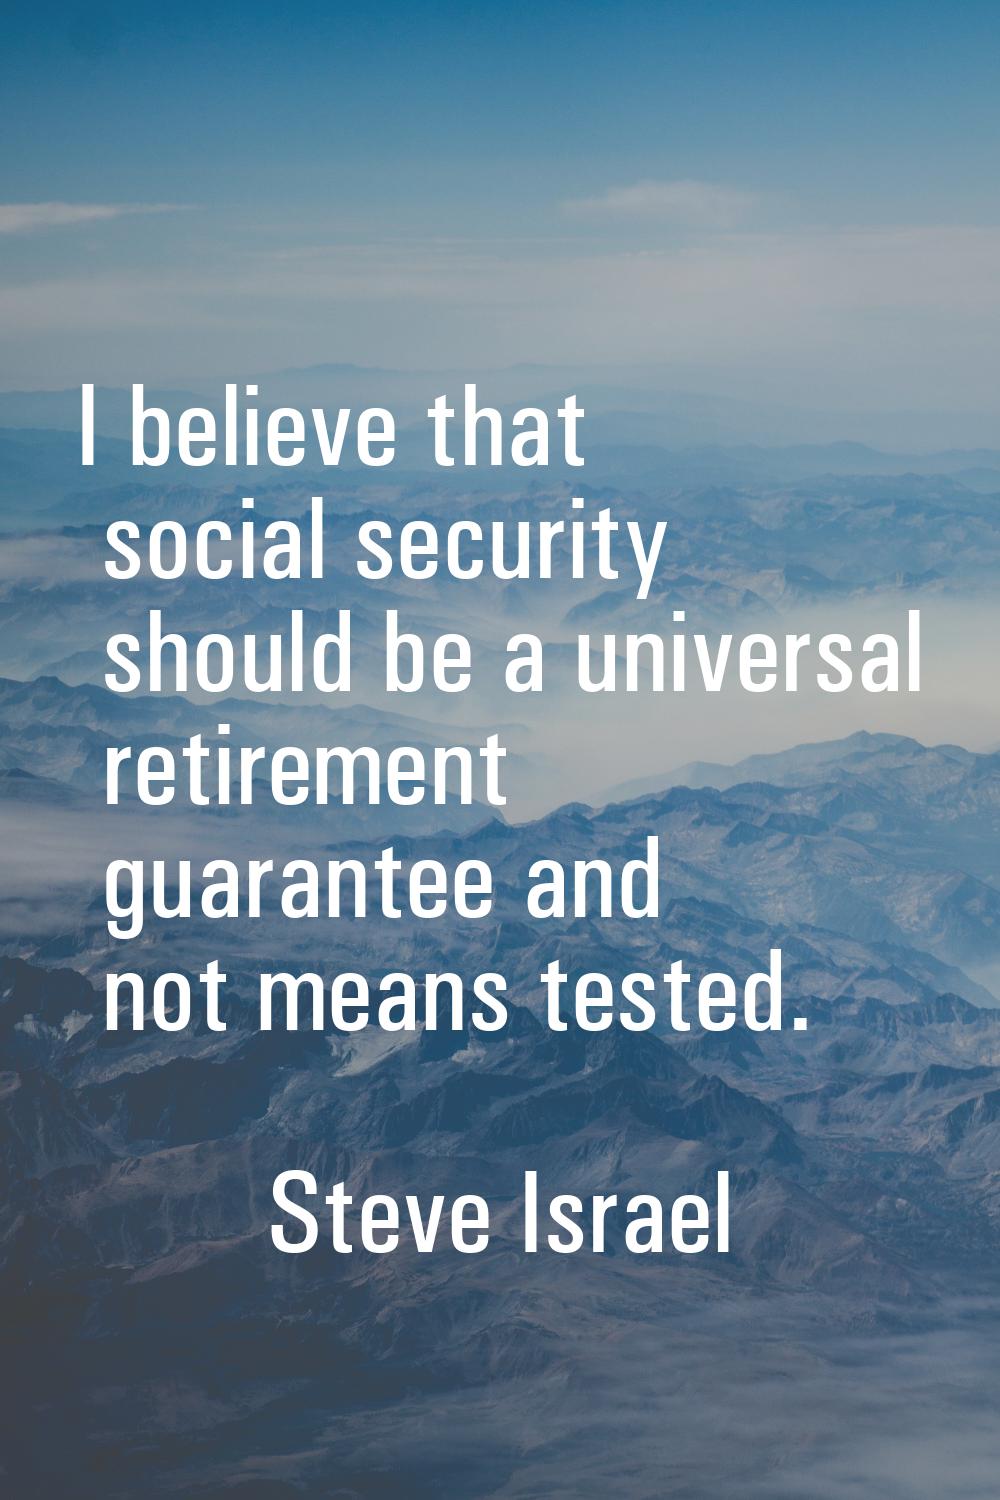 I believe that social security should be a universal retirement guarantee and not means tested.